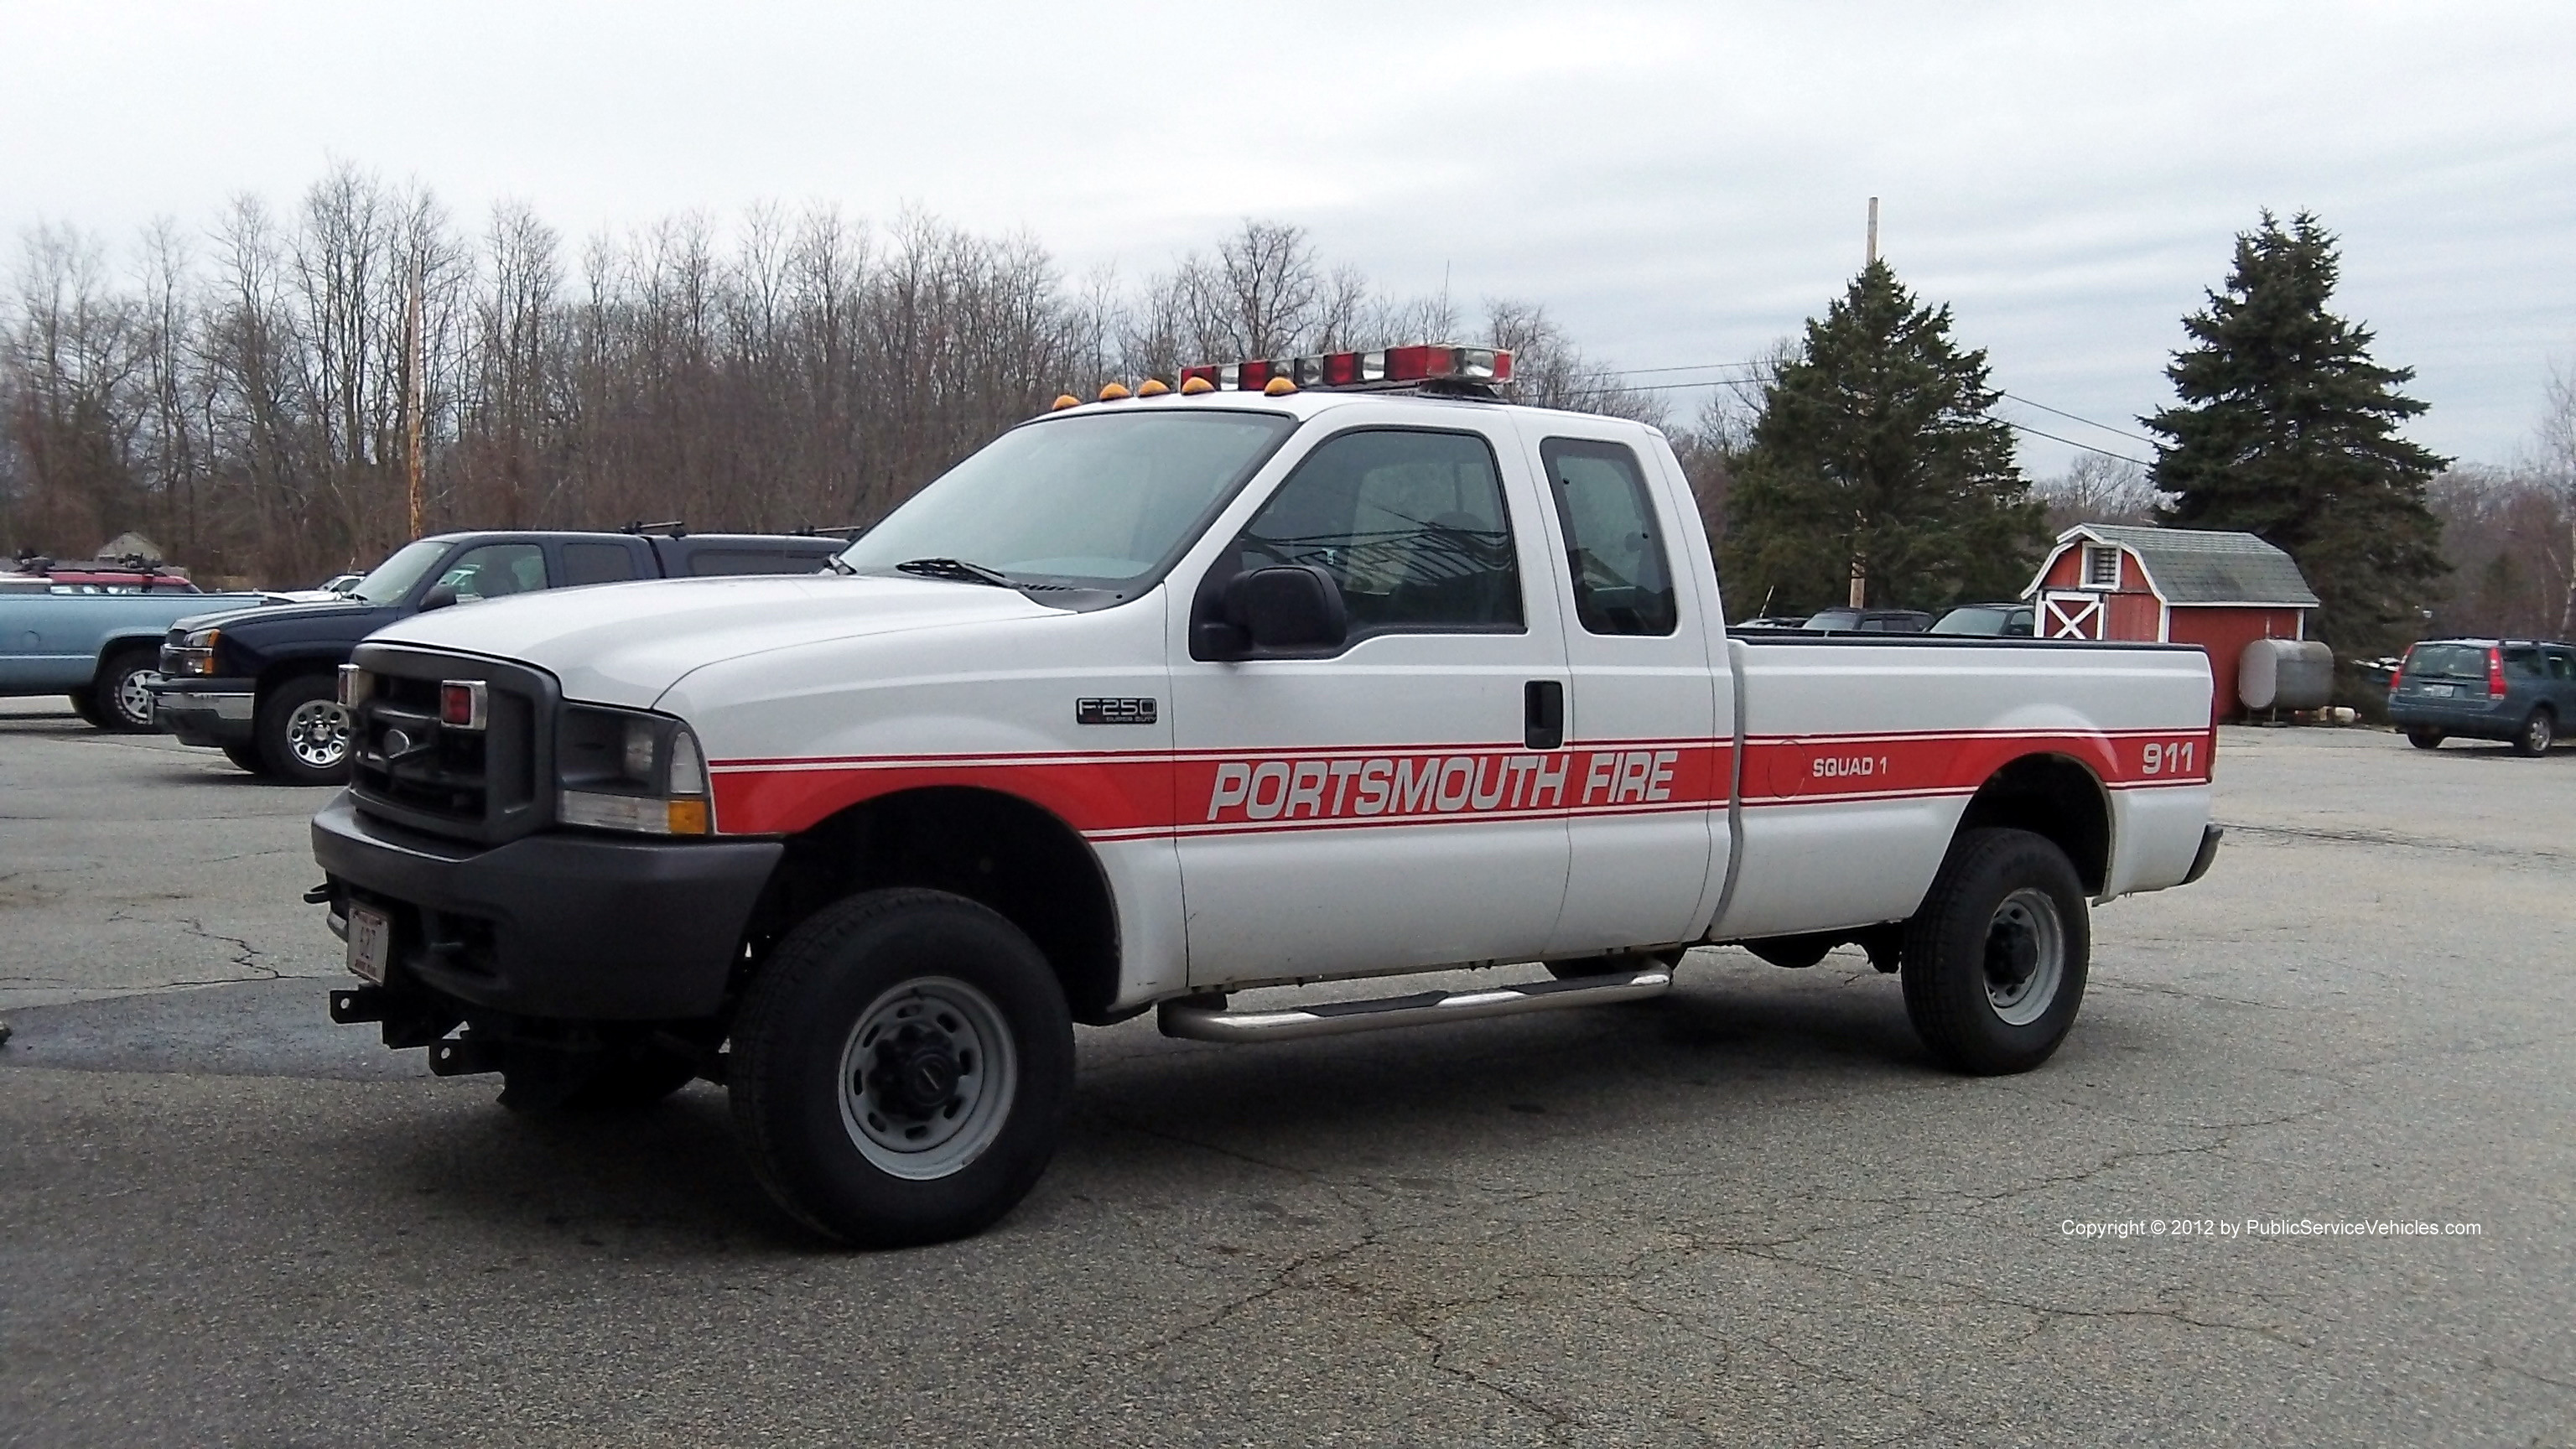 A photo  of Portsmouth Fire
            Squad 1, a 2004 Ford F-250 SuperCab             taken by Kieran Egan